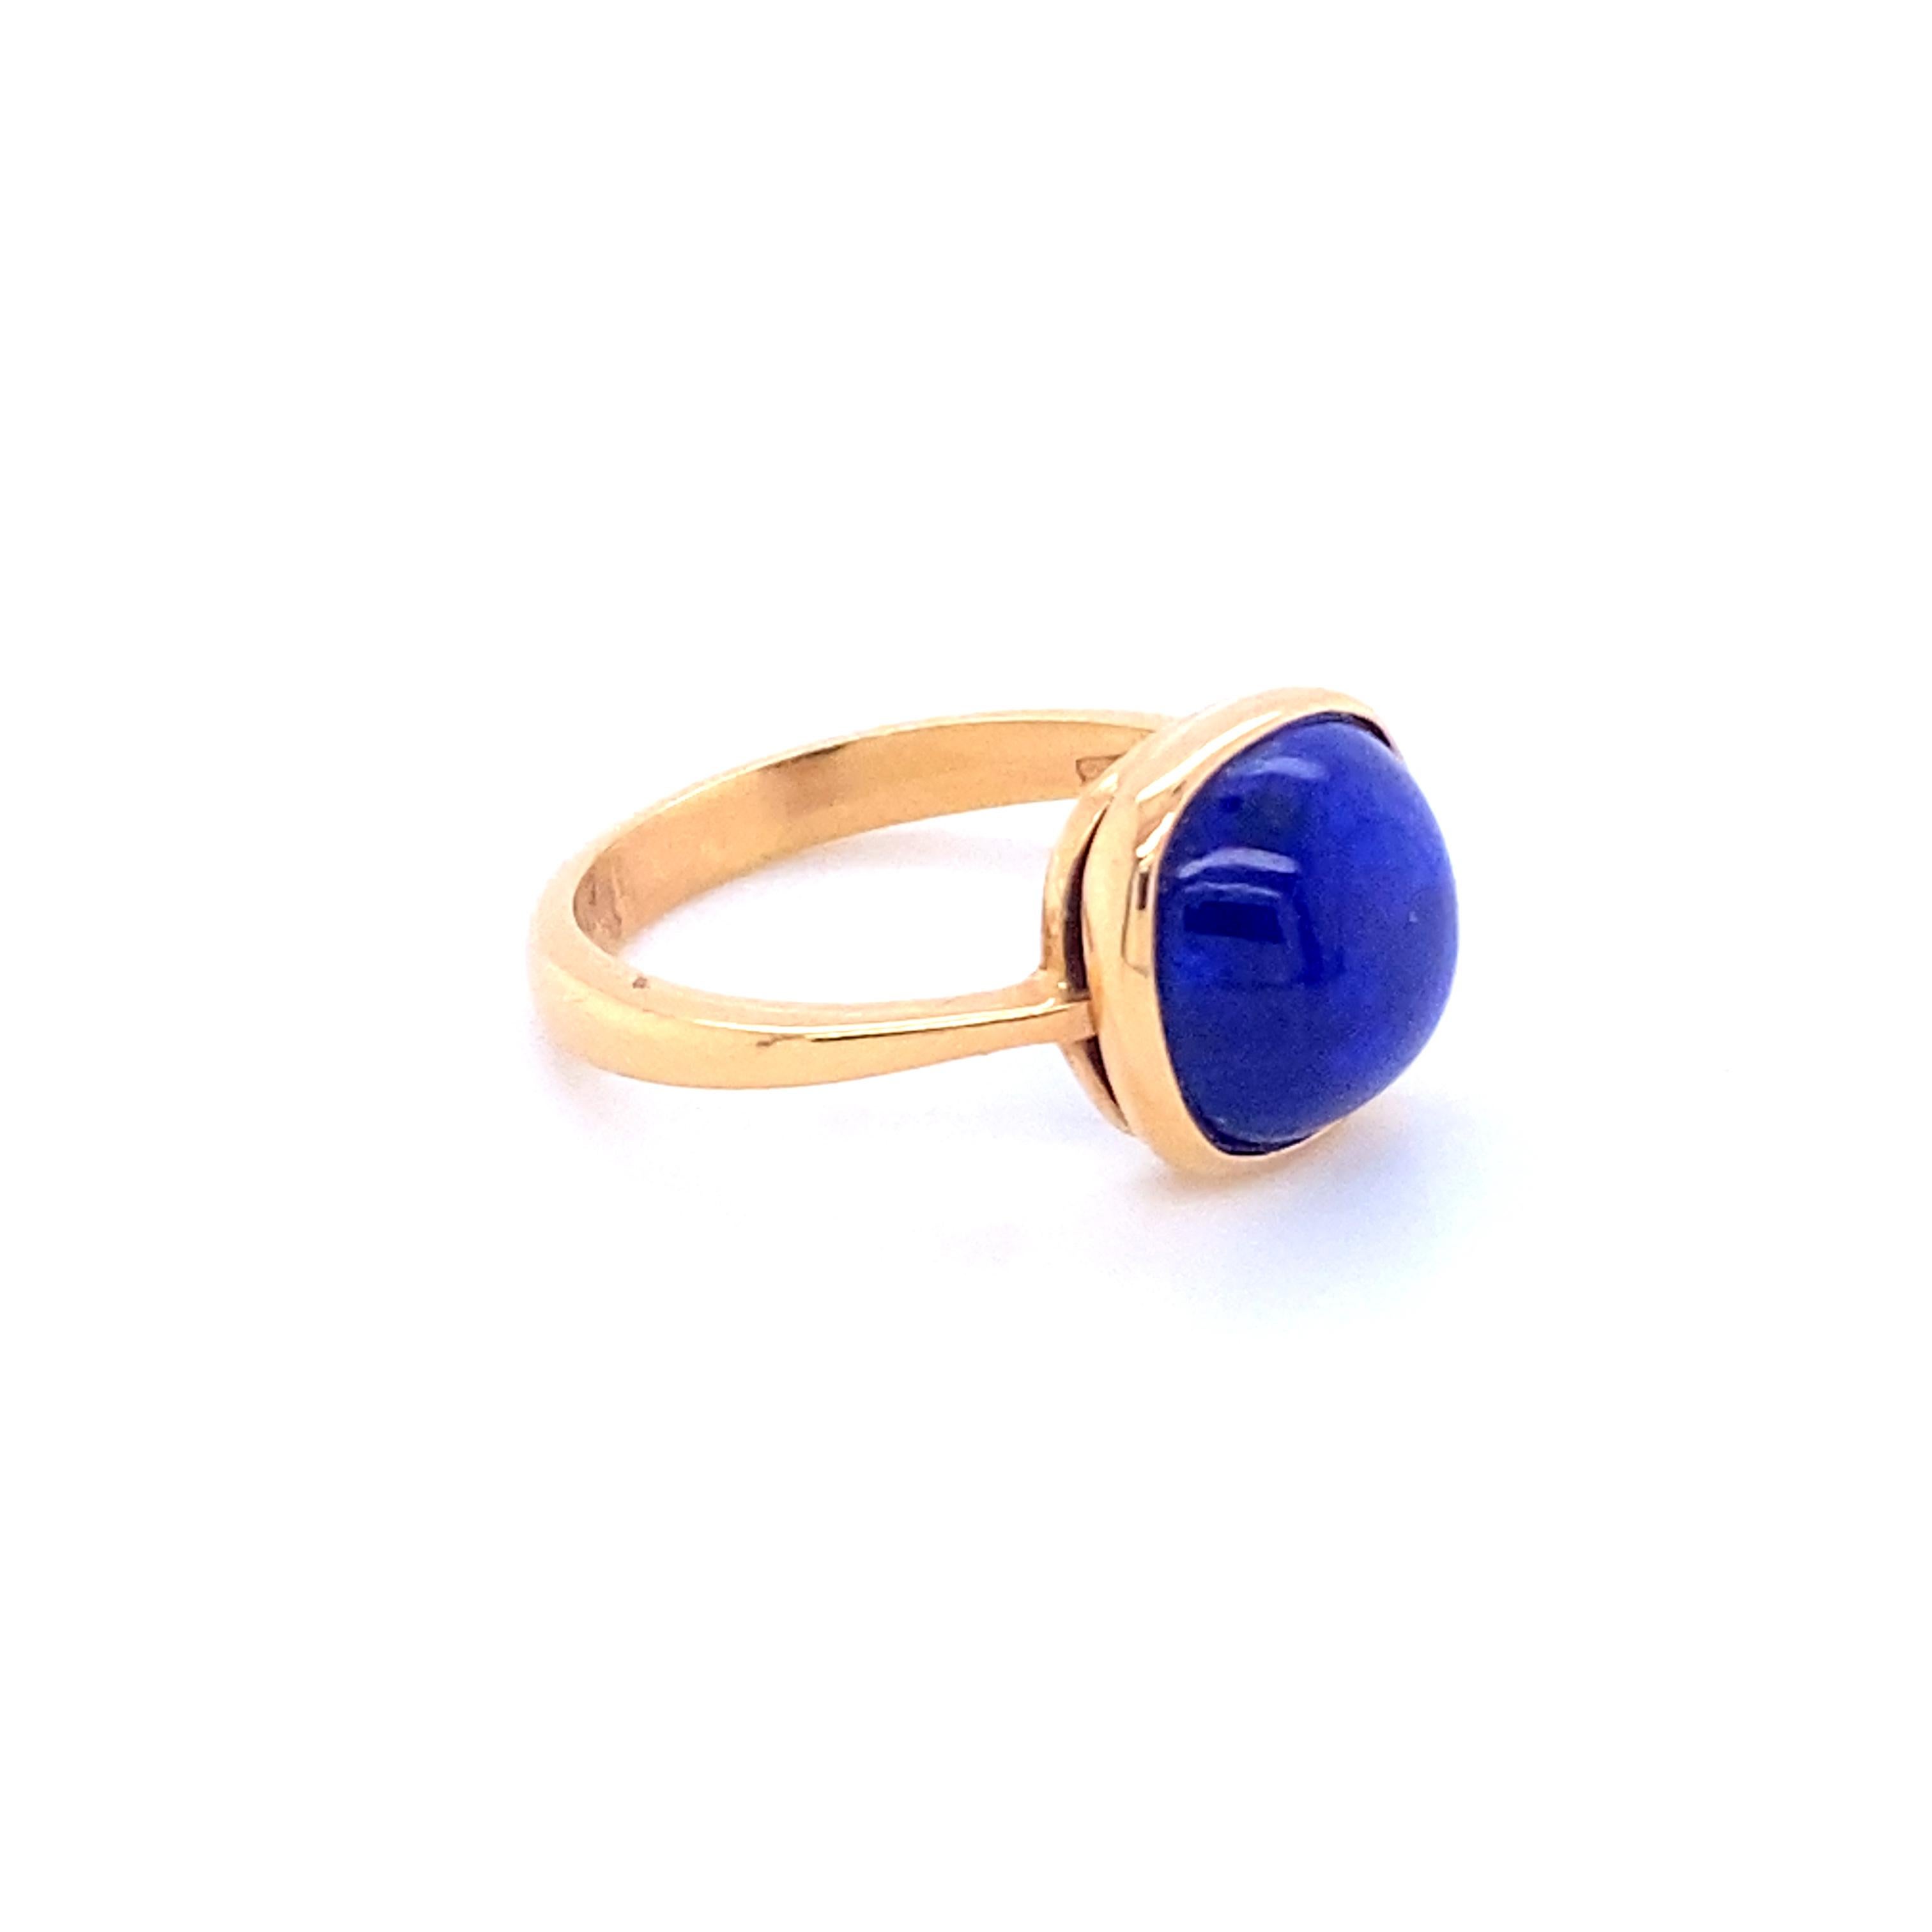 Rose gold cocktail ring with a Lapis Lazuli
Cocktail ring in 18 Carat pink gold surmounted by a Cabochon Lapis Lazuli which measures 1 cm in length and 1 cm in width. 
This ring is ideal in accumulation with other colored rings like that rings with